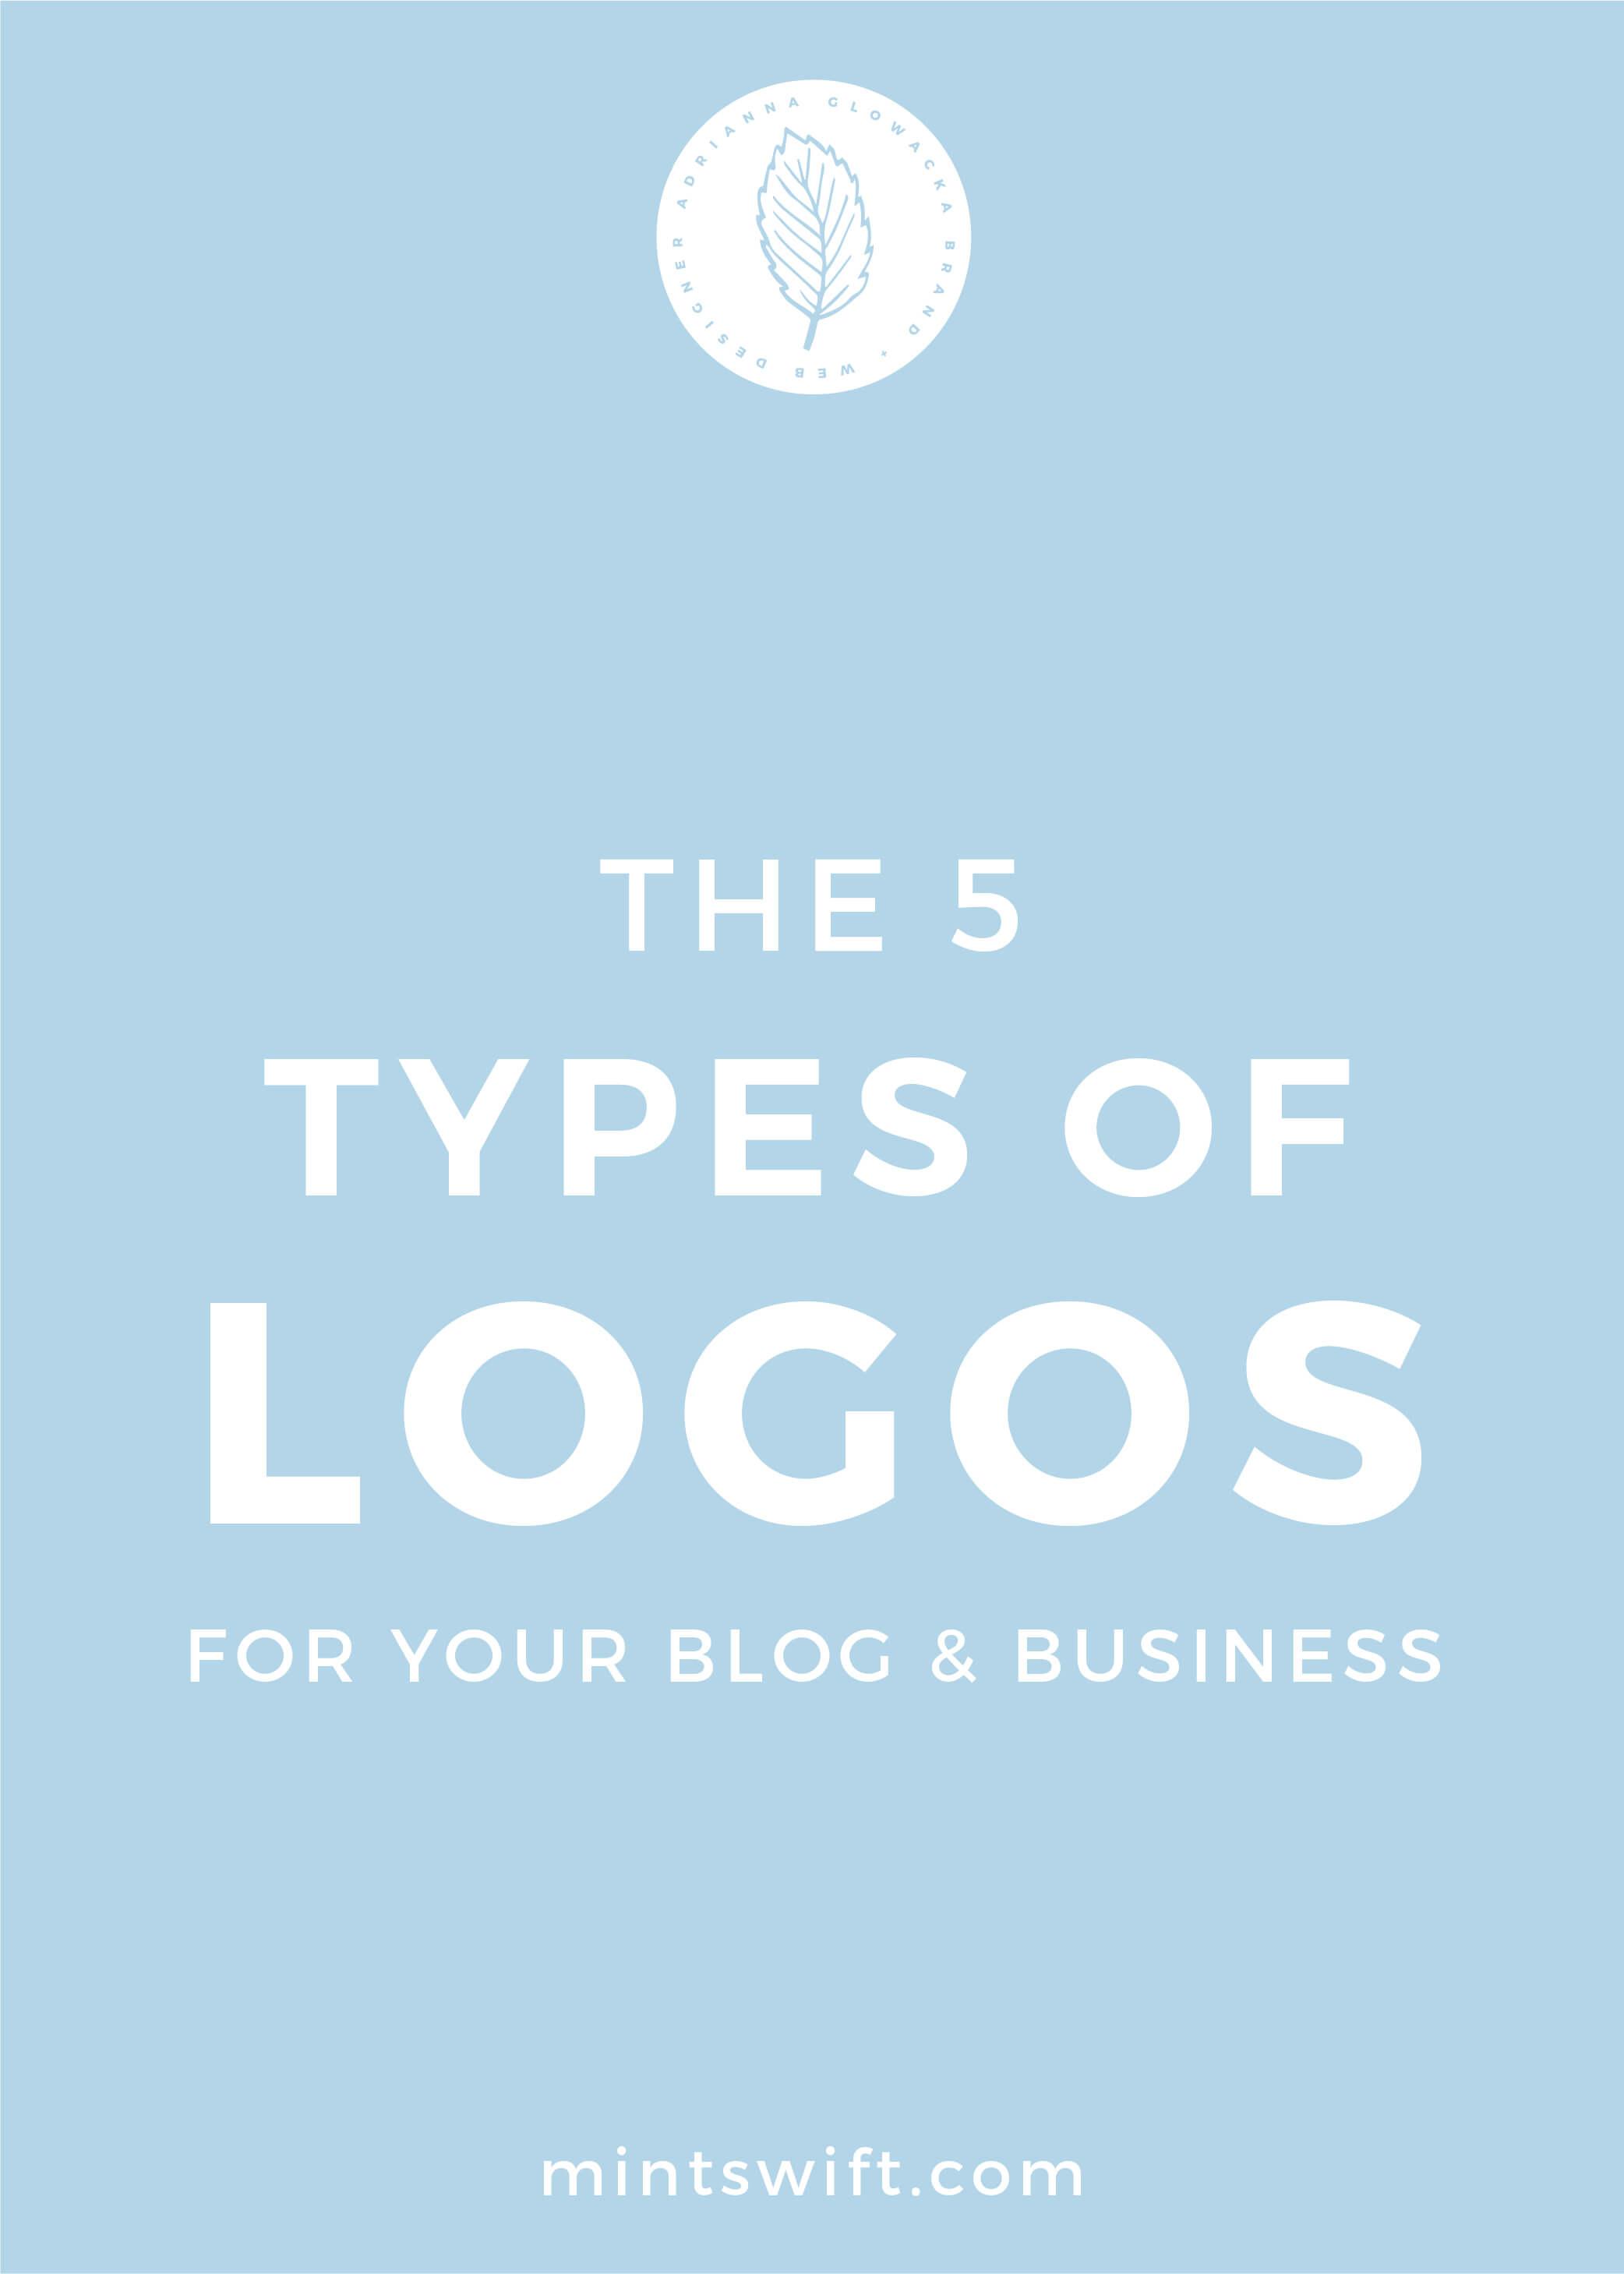 Business Blog Logo - The 5 Types of Logos for Your Blog & Business - MintSwift